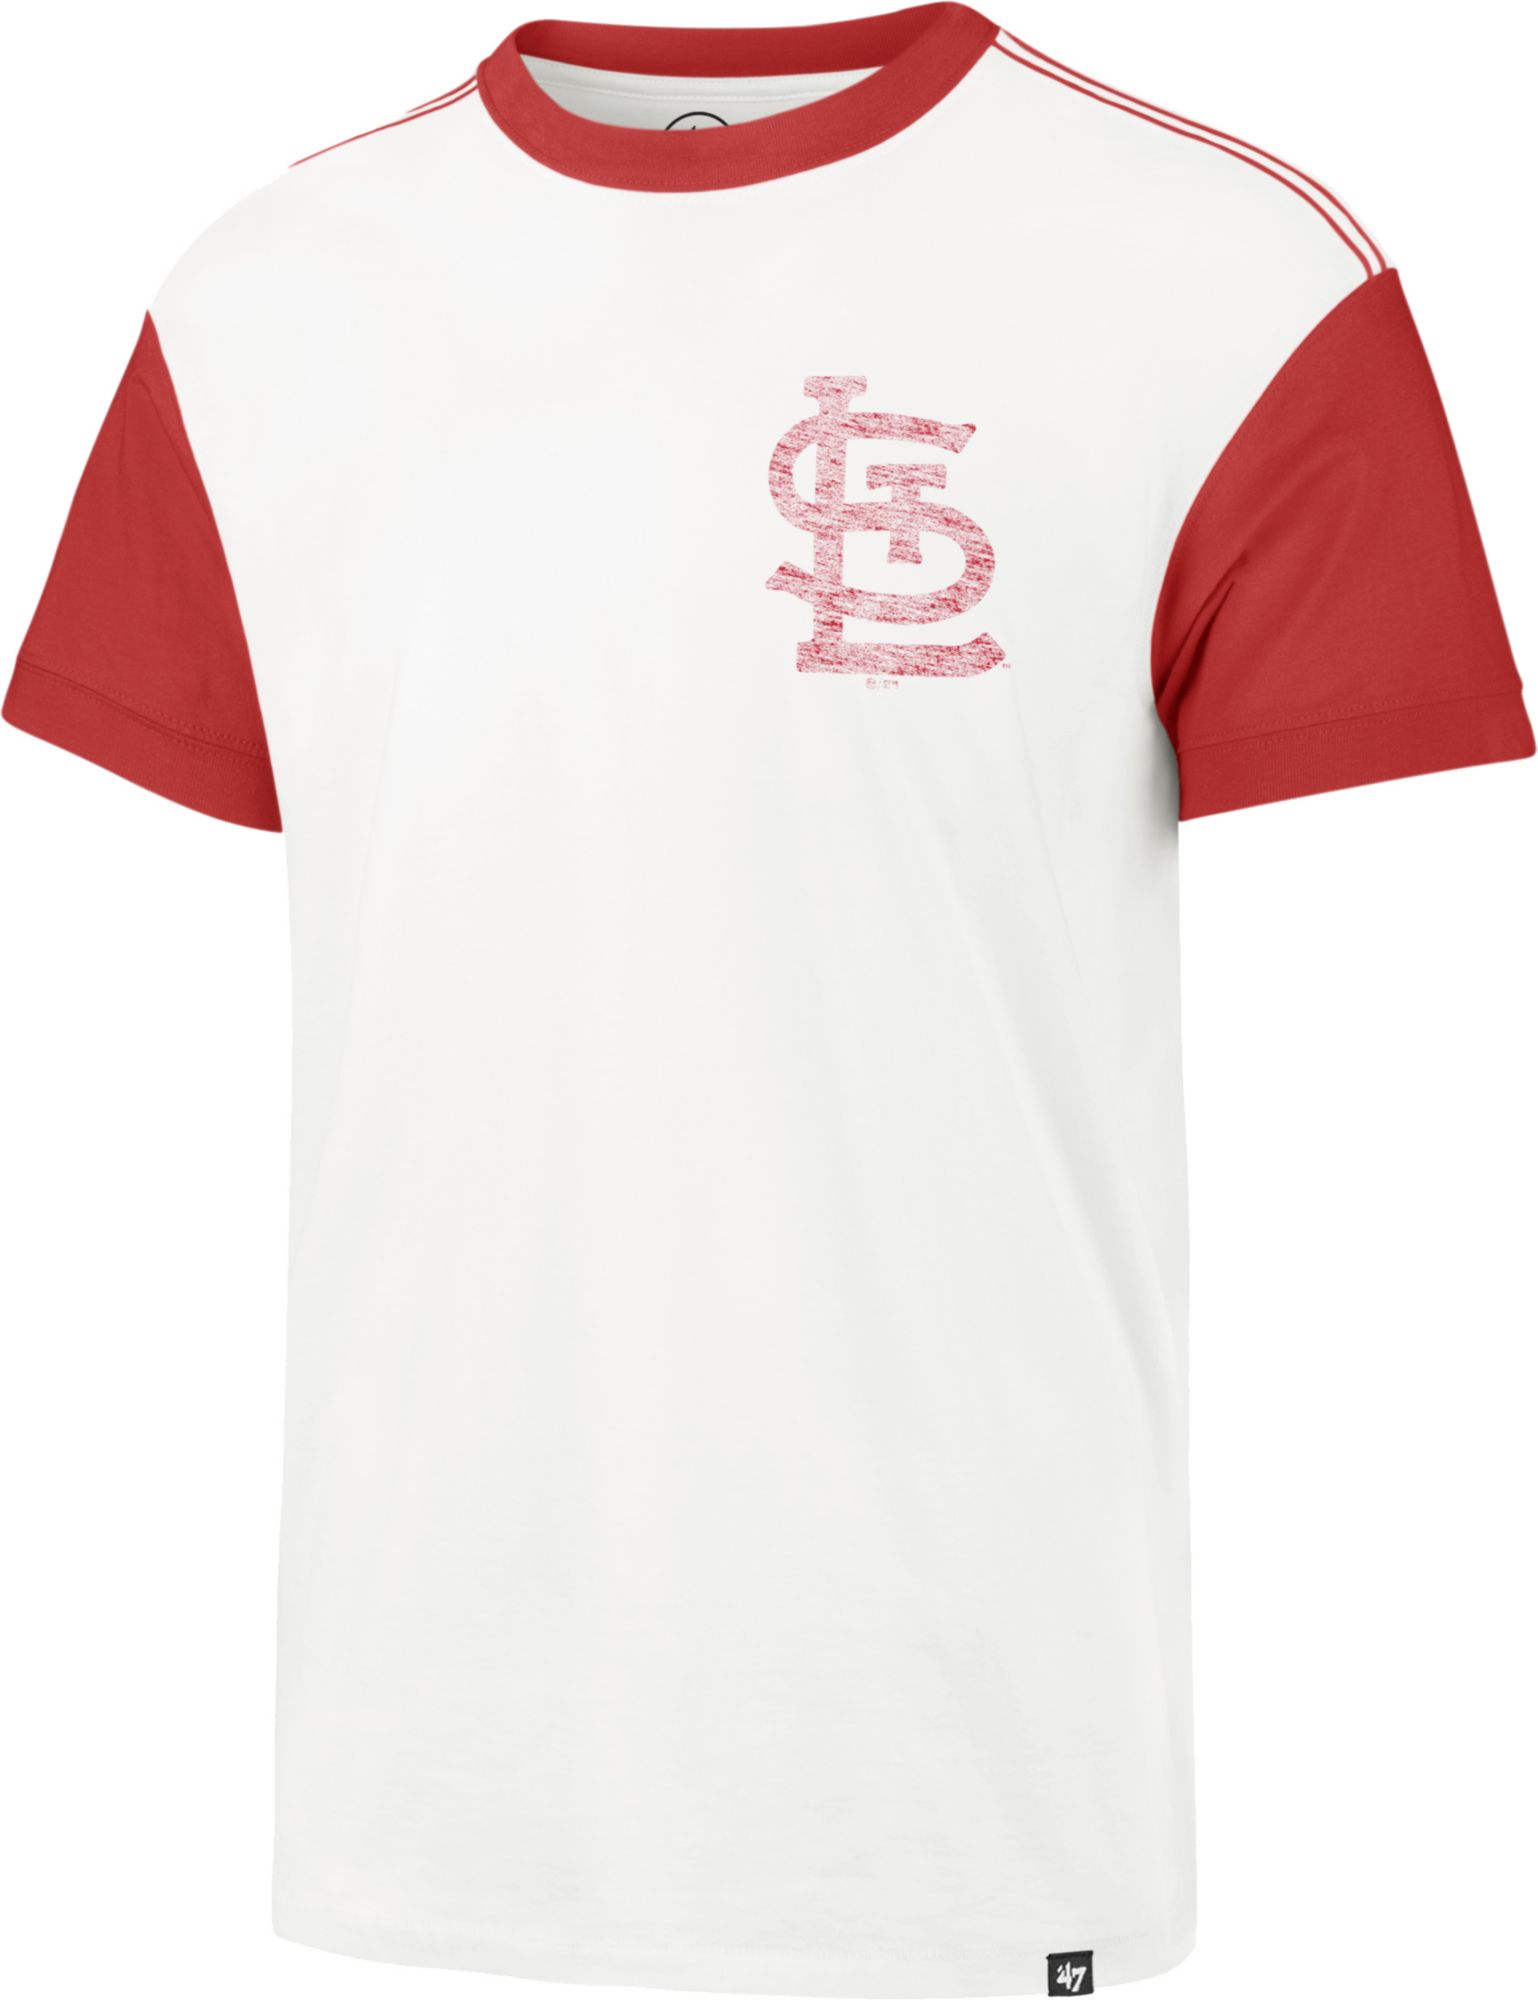 Youth White/Red St. Louis Cardinals V-Neck T-Shirt 